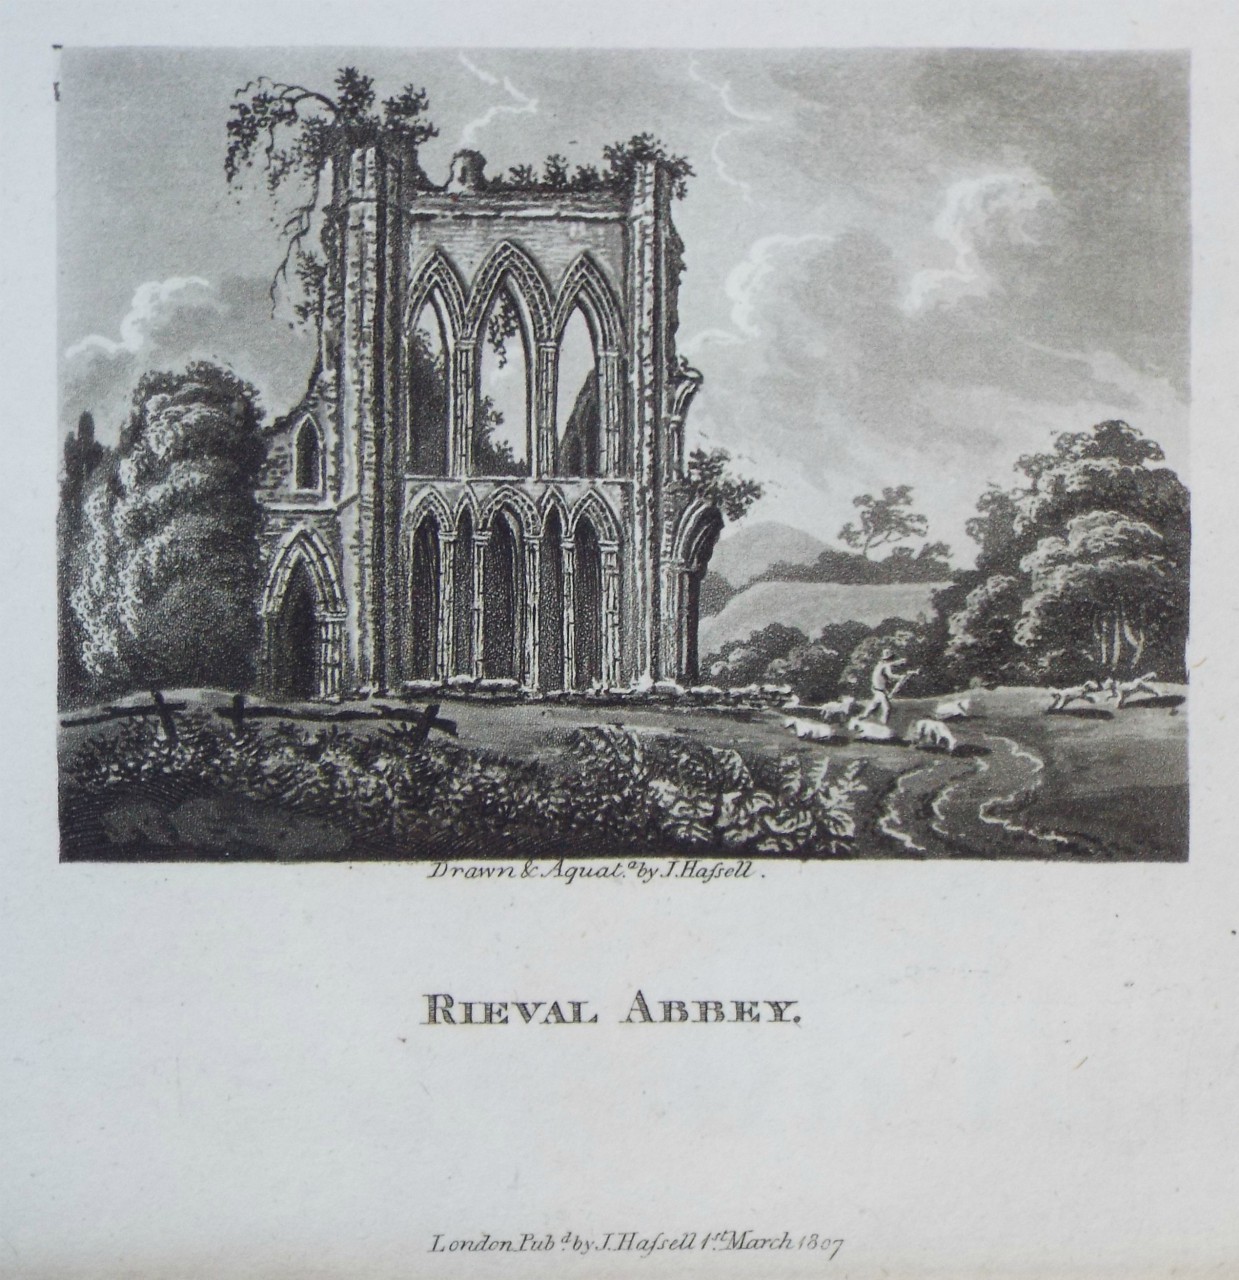 Aquatint - Rieval Abbey. - Hassell